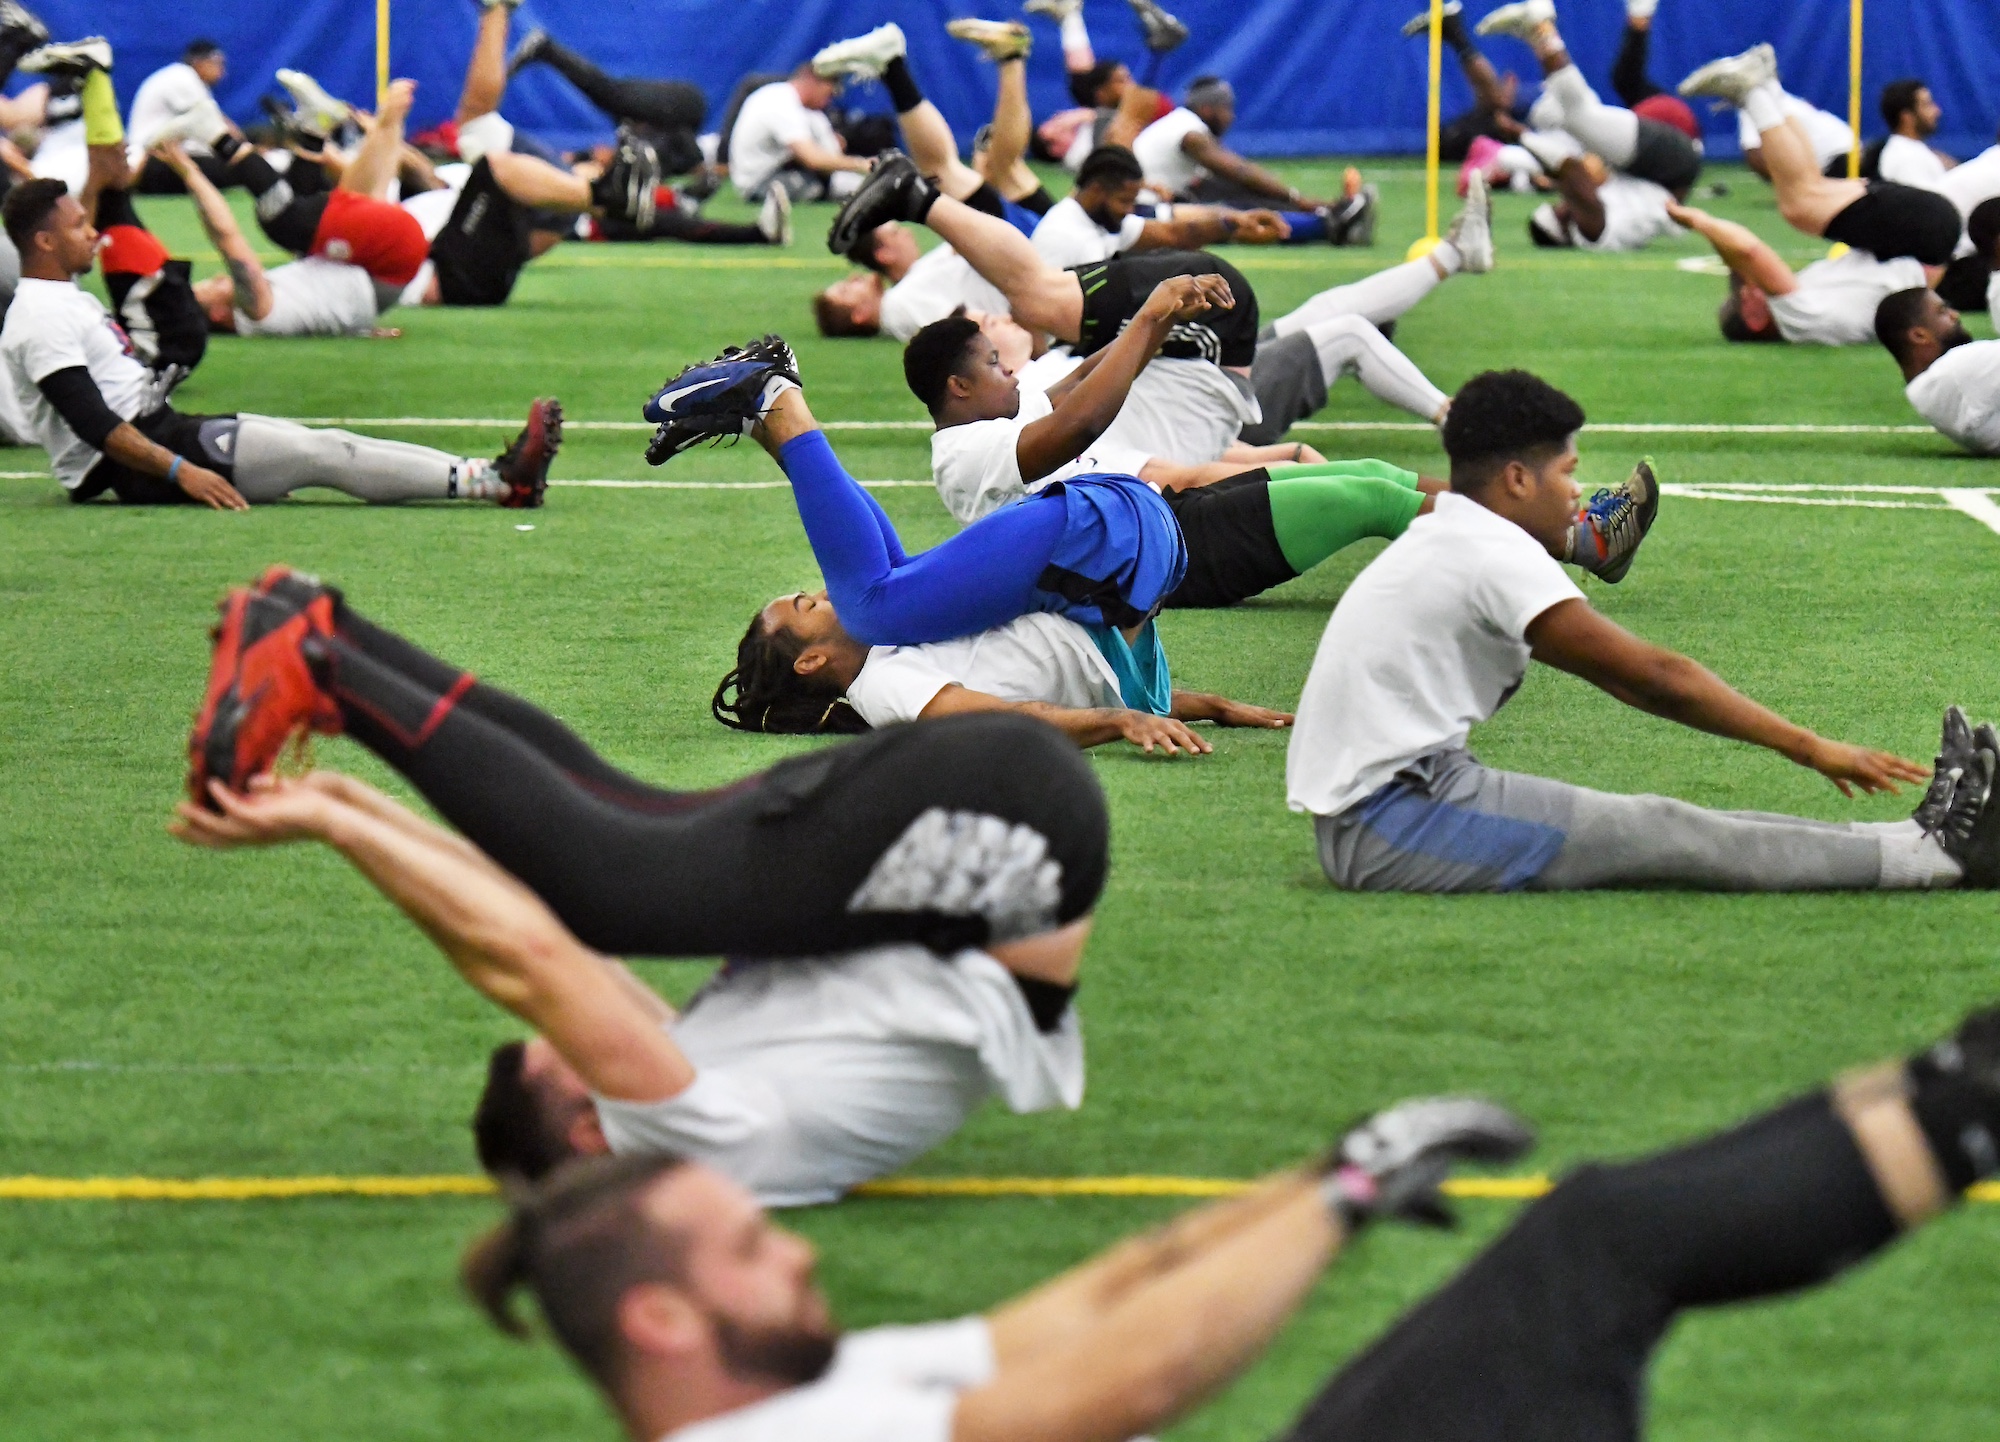 Hundreds of hopefuls try out for the Albany Empires Arena Football League team at Sportsplex Saturday Jan. 27, 2018 in Halfmoon, NY. (Photo by John Carl D'Annibale /Albany Times Union via Getty Images)